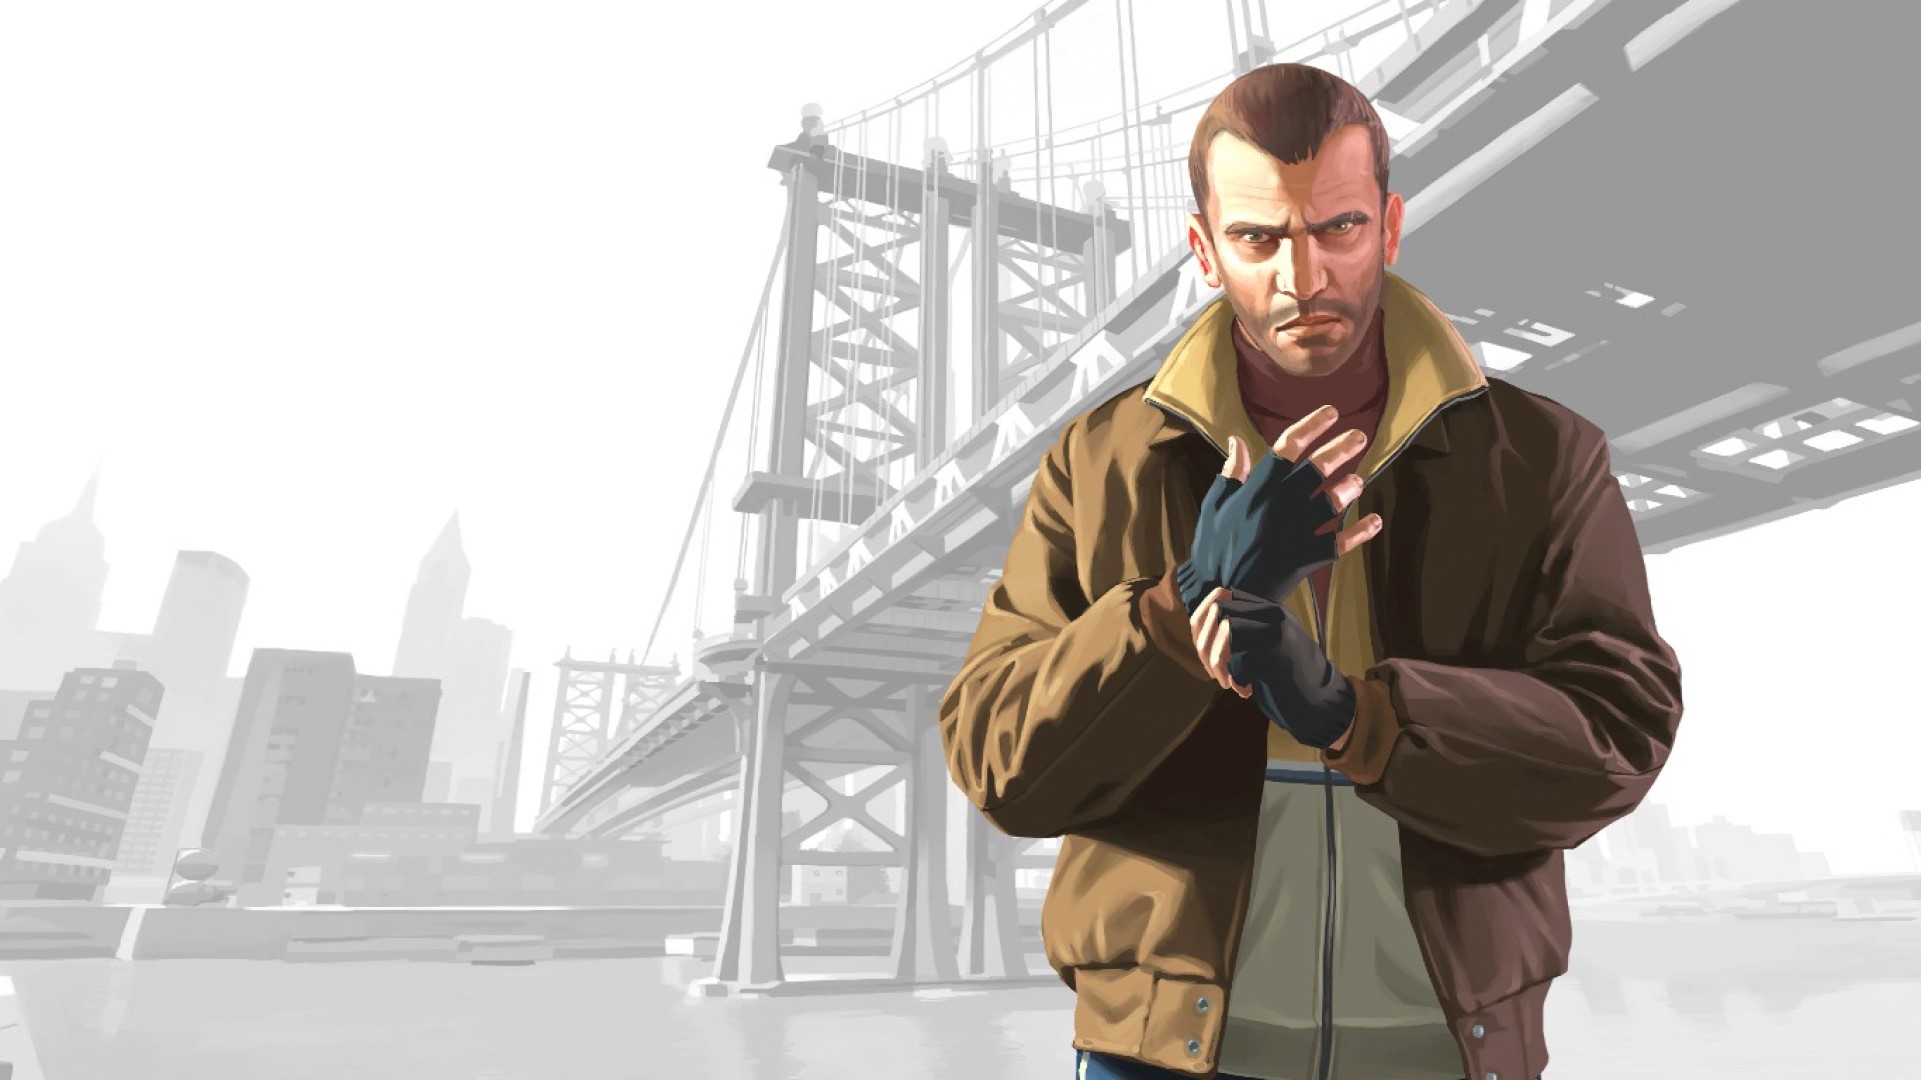 The image on the Niko Bellic LifeInvader page in GTA 5 is from the original  GTA 4 artworks which you can find on the Rockstar Games website. : r/GTA